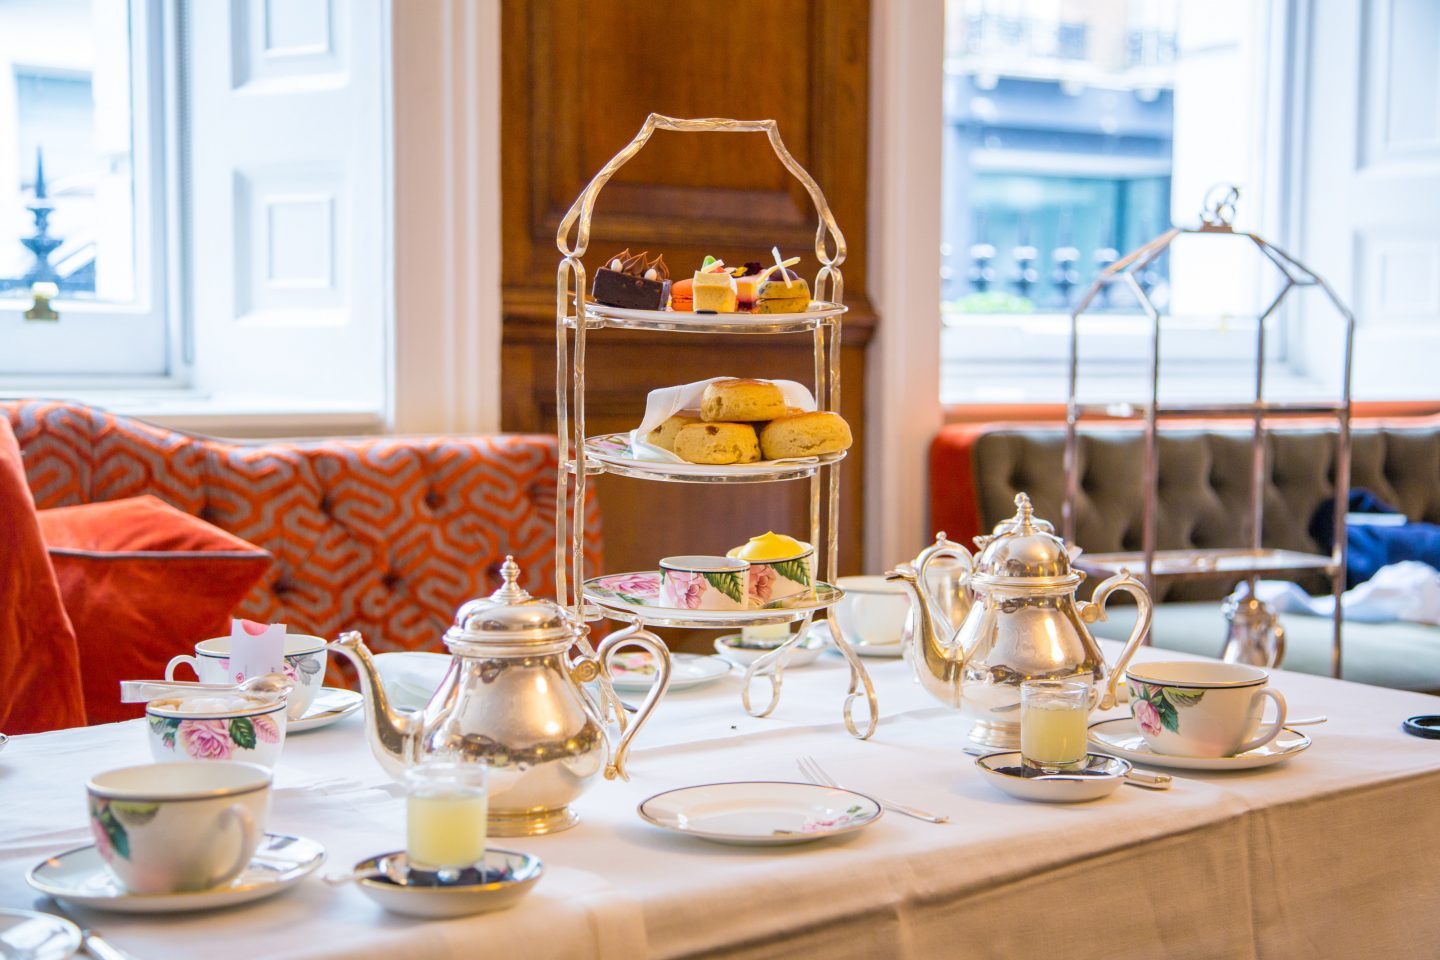 Discover your perfect afternoon tea experience